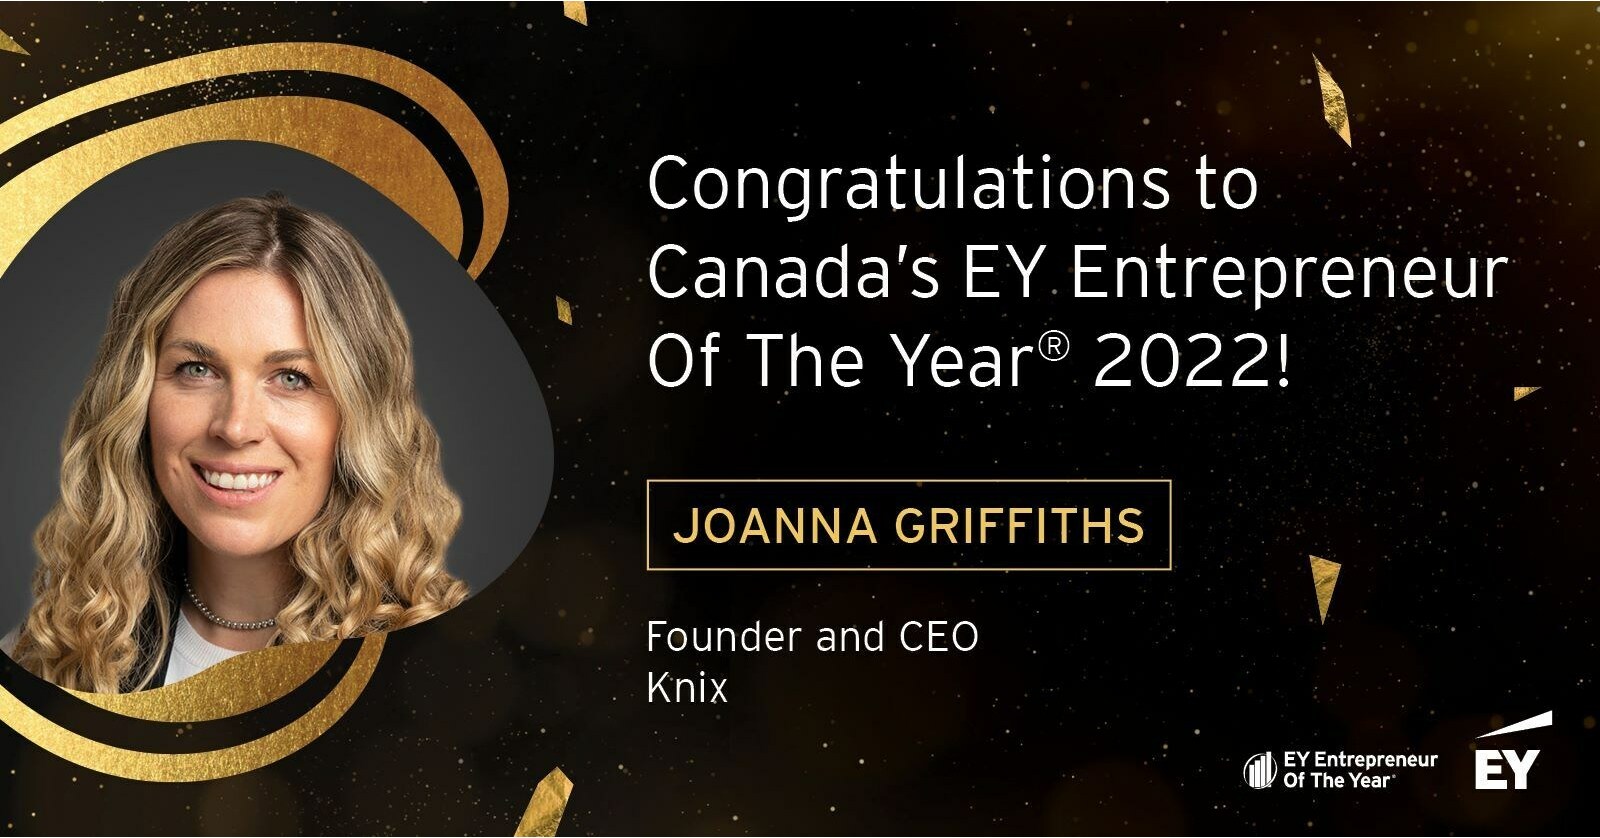 Joanna Griffiths: CEO of knix